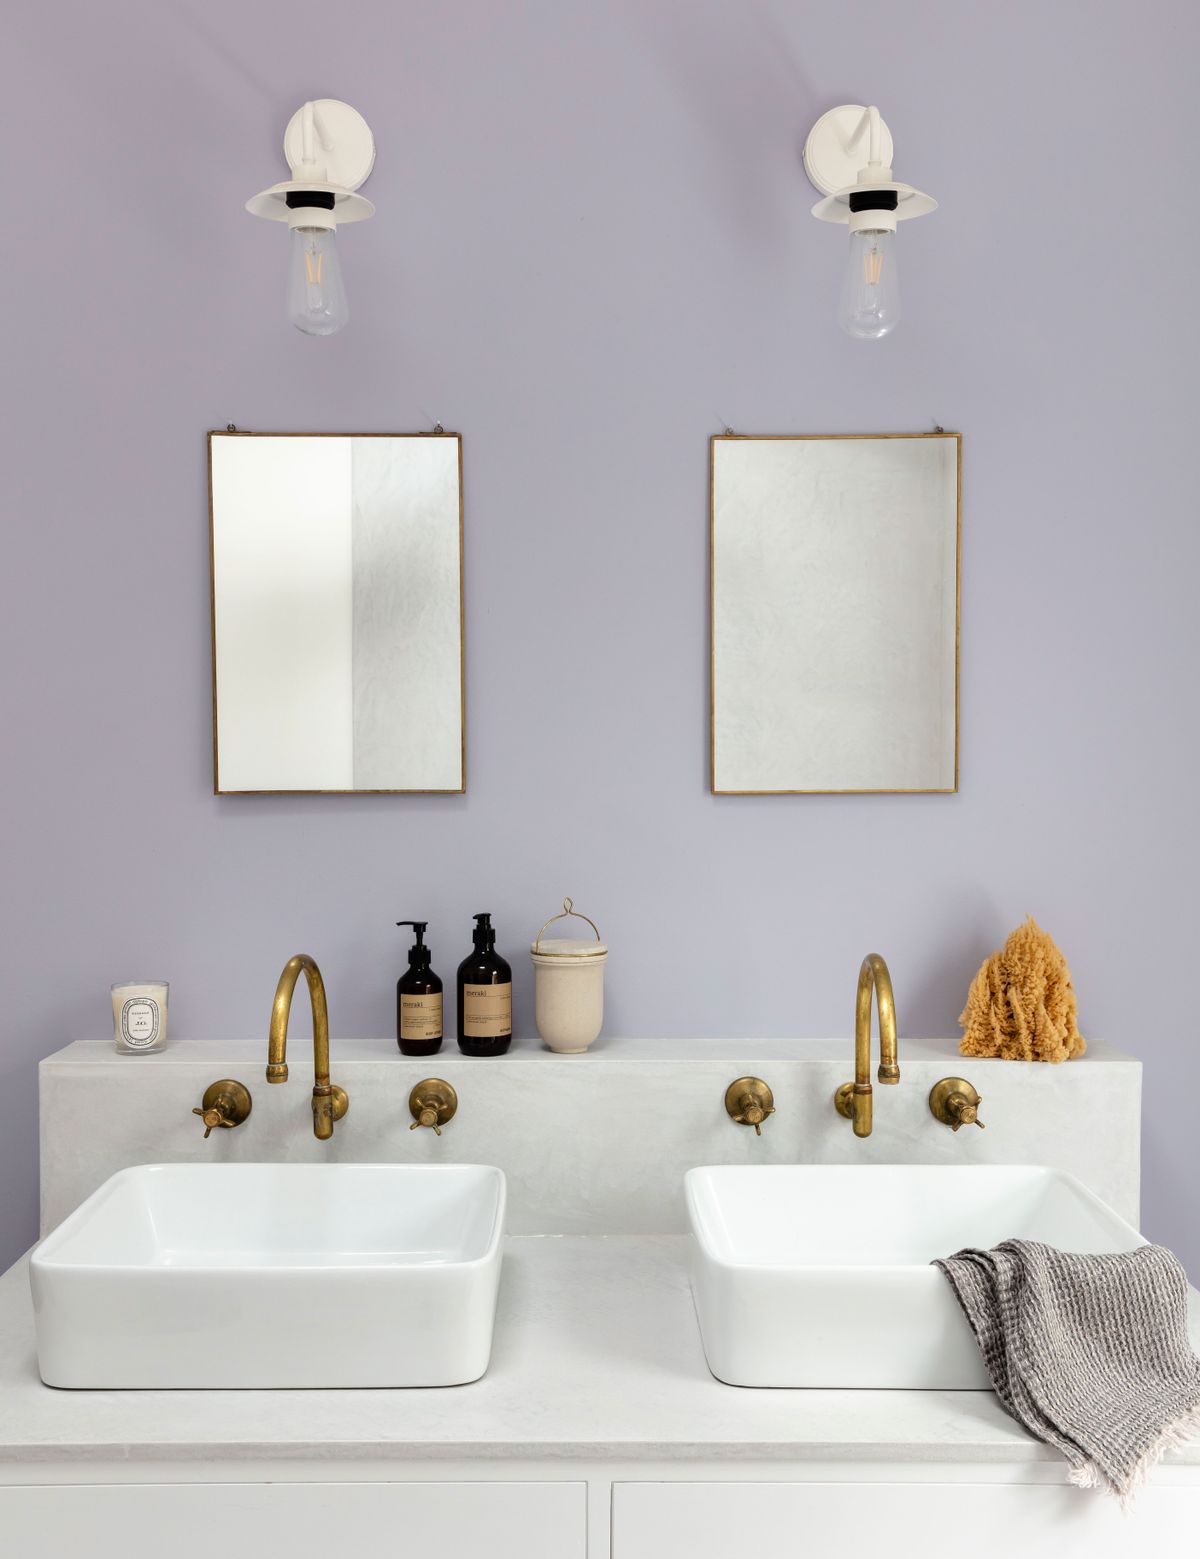 25 Bathroom Paint Ideas To Brighten Up Your Color Scheme Real Homes